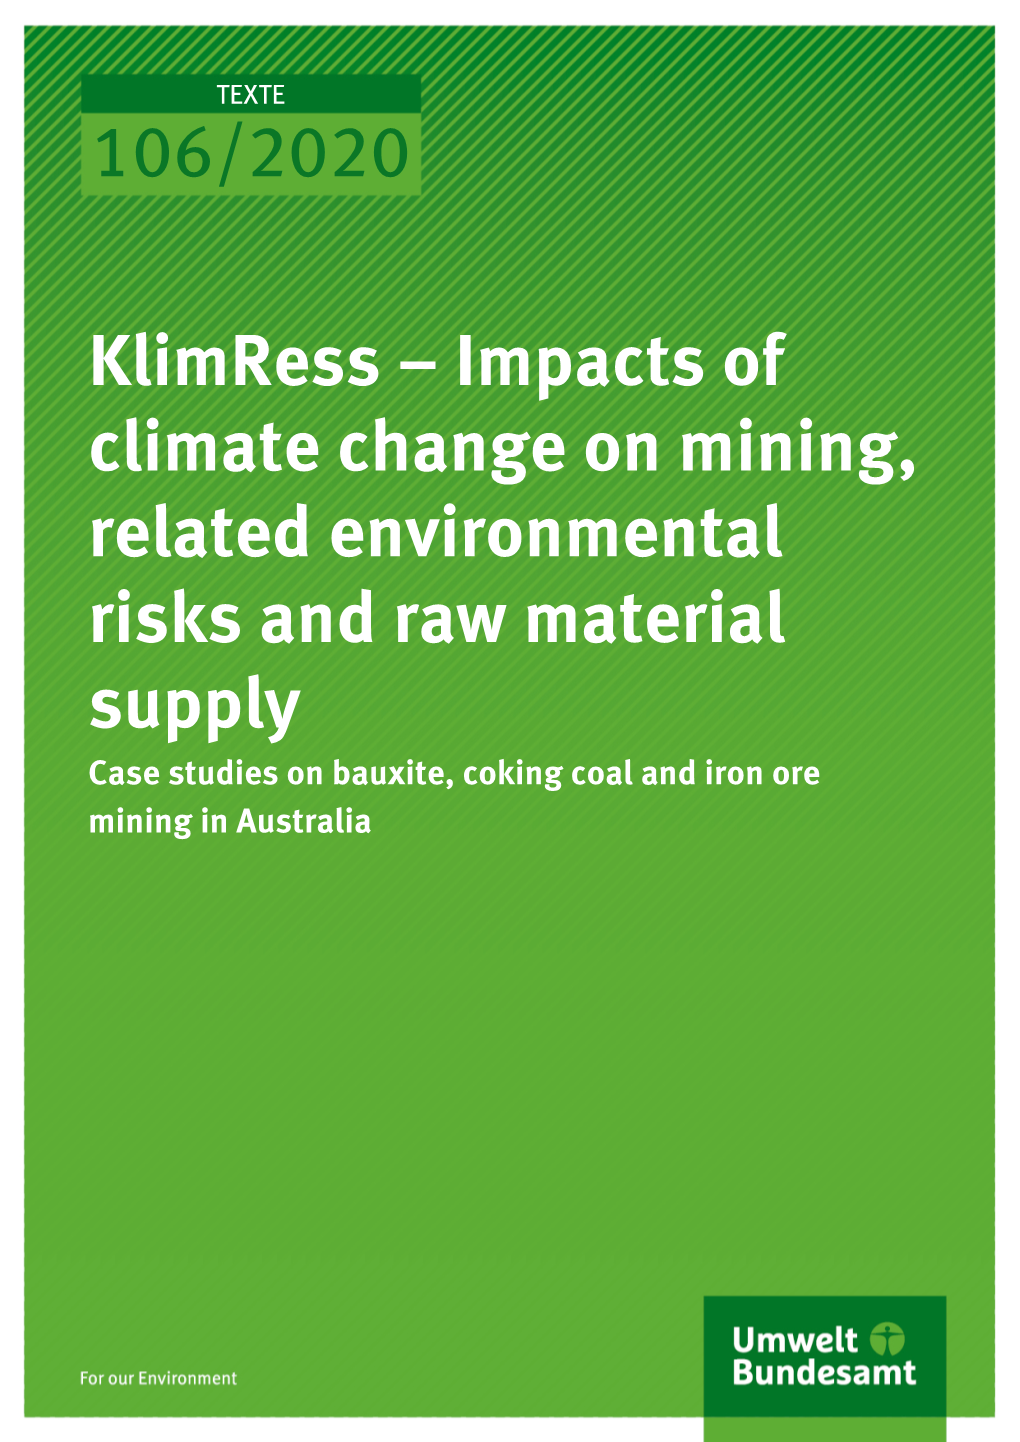 106/2020 Klimress – Impacts of Climate Change on Mining, Related Environmental Risks and Raw Material Supply